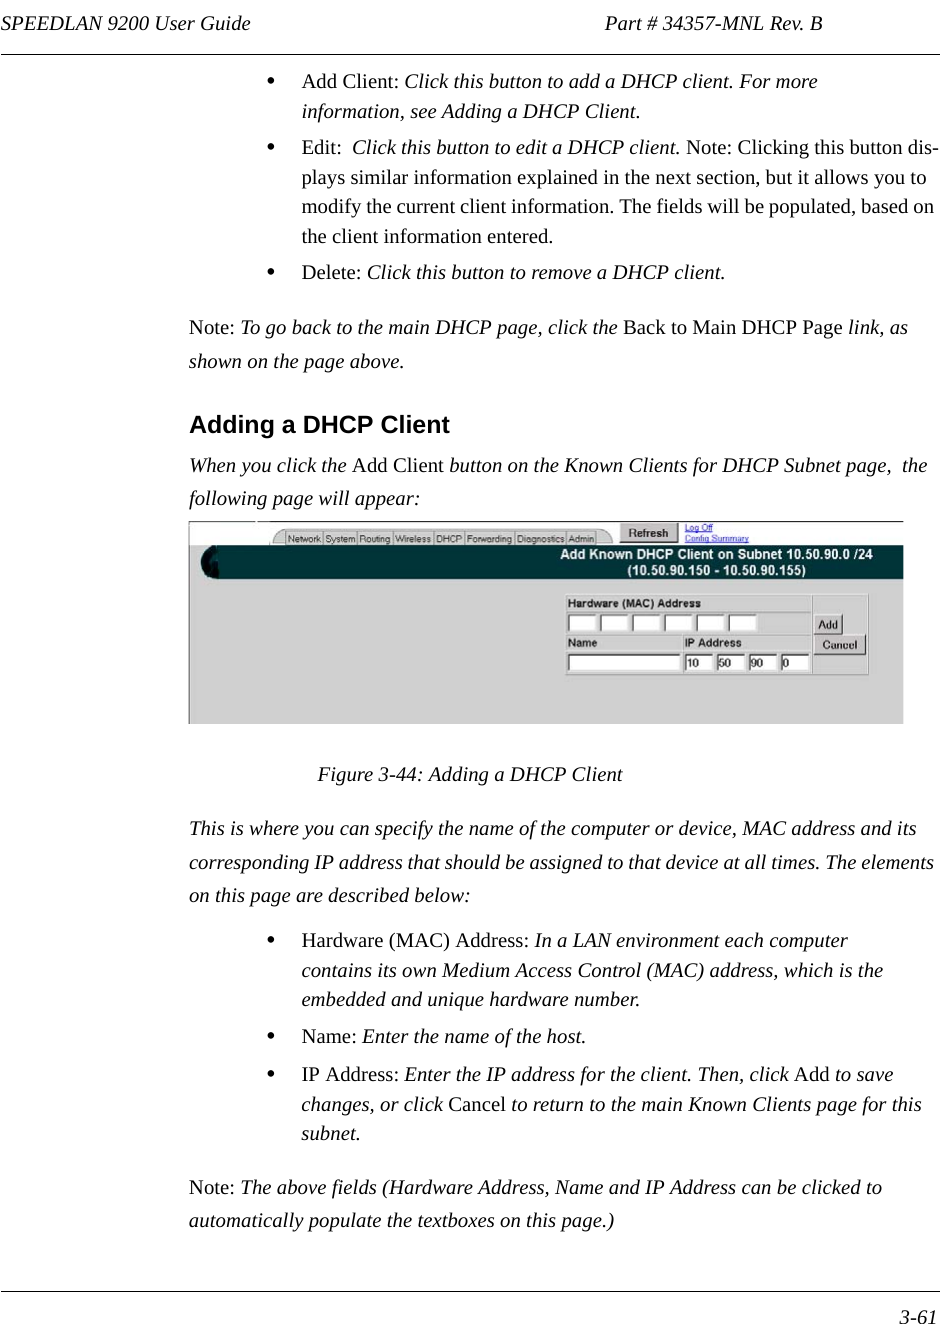 SPEEDLAN 9200 User Guide                                                                    Part # 34357-MNL Rev. B      3-61                                                                                                                                                              •Add Client: Click this button to add a DHCP client. For more information, see Adding a DHCP Client.•Edit:  Click this button to edit a DHCP client. Note: Clicking this button dis-plays similar information explained in the next section, but it allows you to modify the current client information. The fields will be populated, based on the client information entered.•Delete: Click this button to remove a DHCP client.Note: To go back to the main DHCP page, click the Back to Main DHCP Page link, as shown on the page above.Adding a DHCP ClientWhen you click the Add Client button on the Known Clients for DHCP Subnet page,  the following page will appear:Figure 3-44: Adding a DHCP ClientThis is where you can specify the name of the computer or device, MAC address and its corresponding IP address that should be assigned to that device at all times. The elements on this page are described below:•Hardware (MAC) Address: In a LAN environment each computer contains its own Medium Access Control (MAC) address, which is the embedded and unique hardware number.  •Name: Enter the name of the host.•IP Address: Enter the IP address for the client. Then, click Add to save changes, or click Cancel to return to the main Known Clients page for this subnet. Note: The above fields (Hardware Address, Name and IP Address can be clicked to automatically populate the textboxes on this page.)